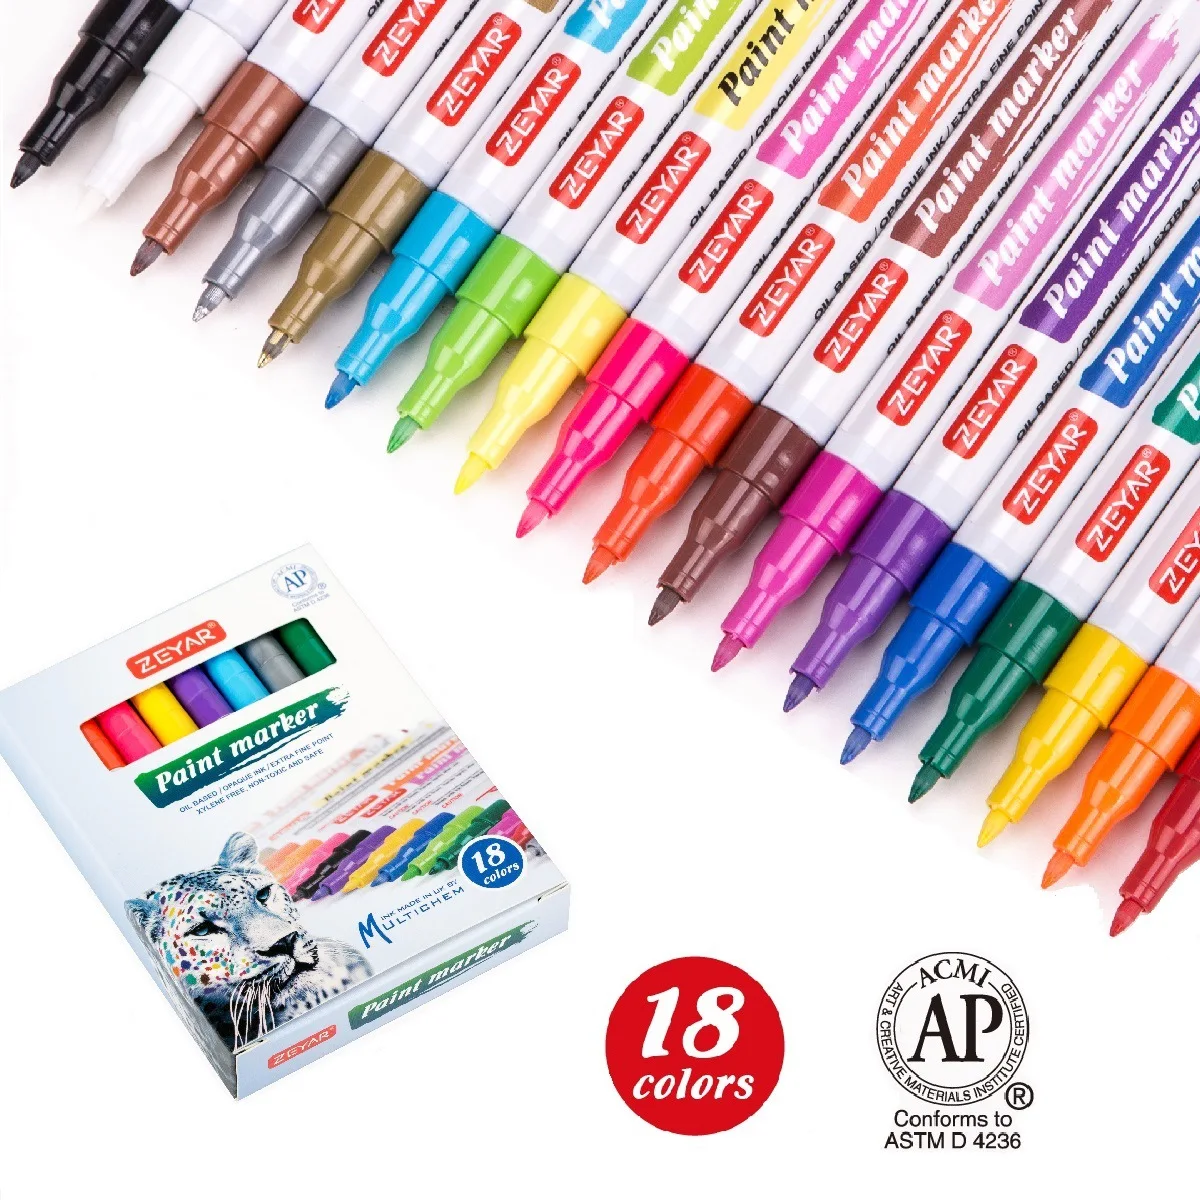 Sharpie Oil Based Medium Point Paint Markers, 5 Fashion Colored Markers  Drawing, Packing and Shipping, Sharpie Arts Crafts 